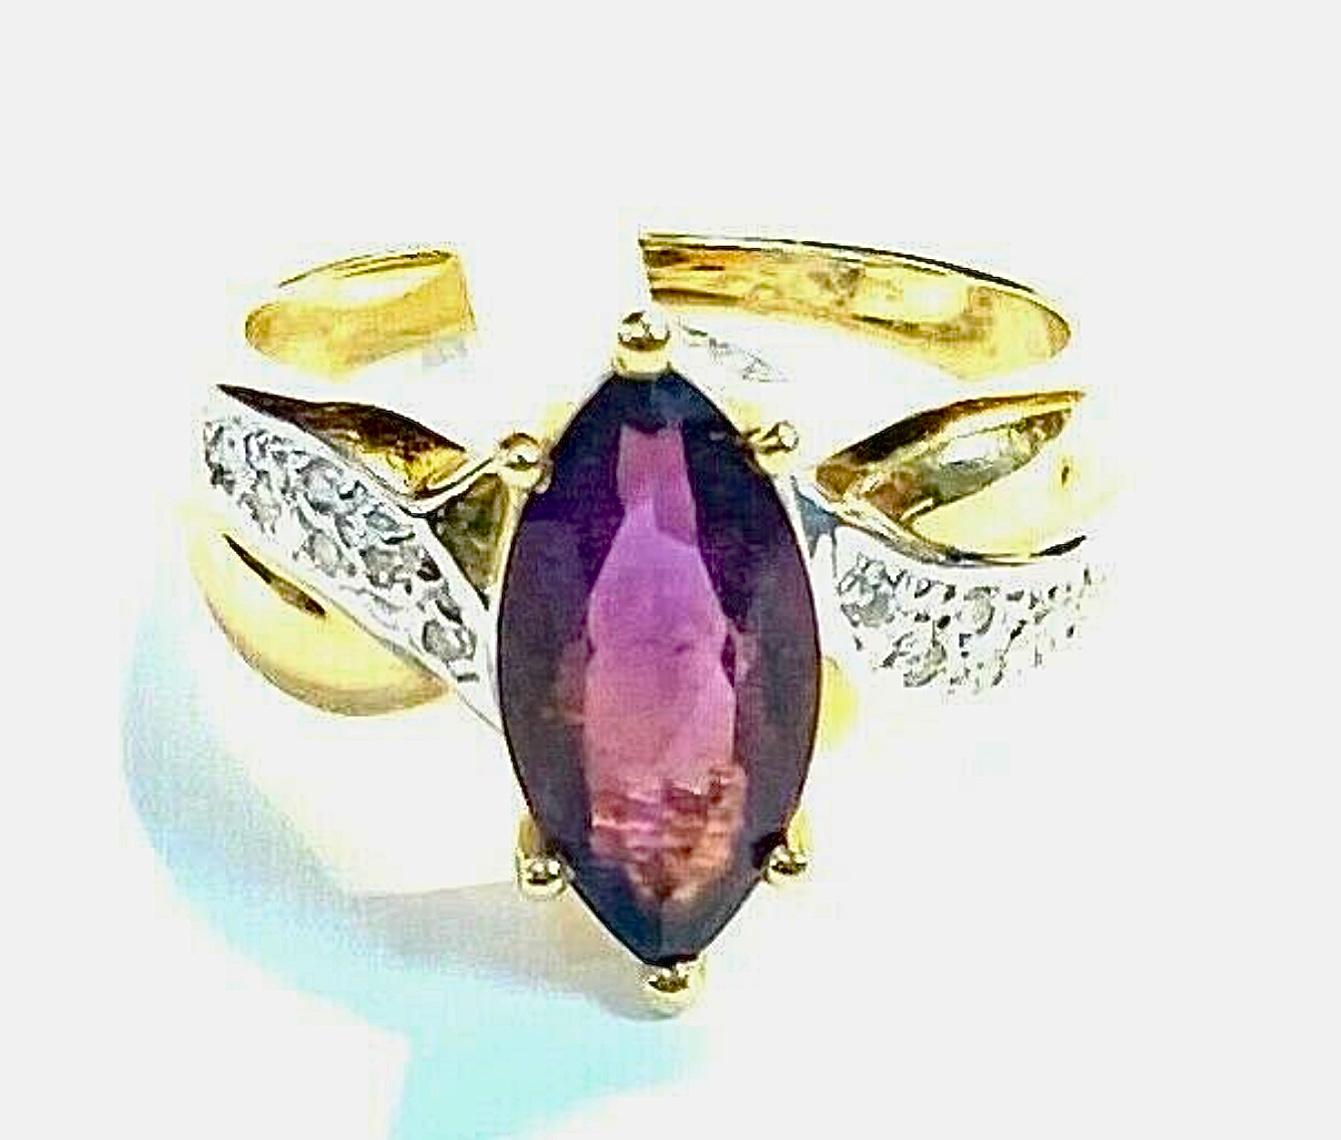 14k yellow gold amethyst and diamond ring, 5.23 Grams TW. The dimensions of the marquise amethyst are approximately 12.6 mm by 7 mm. Approximately 2 carats. Marked 14k.  Approximate size 7.5.